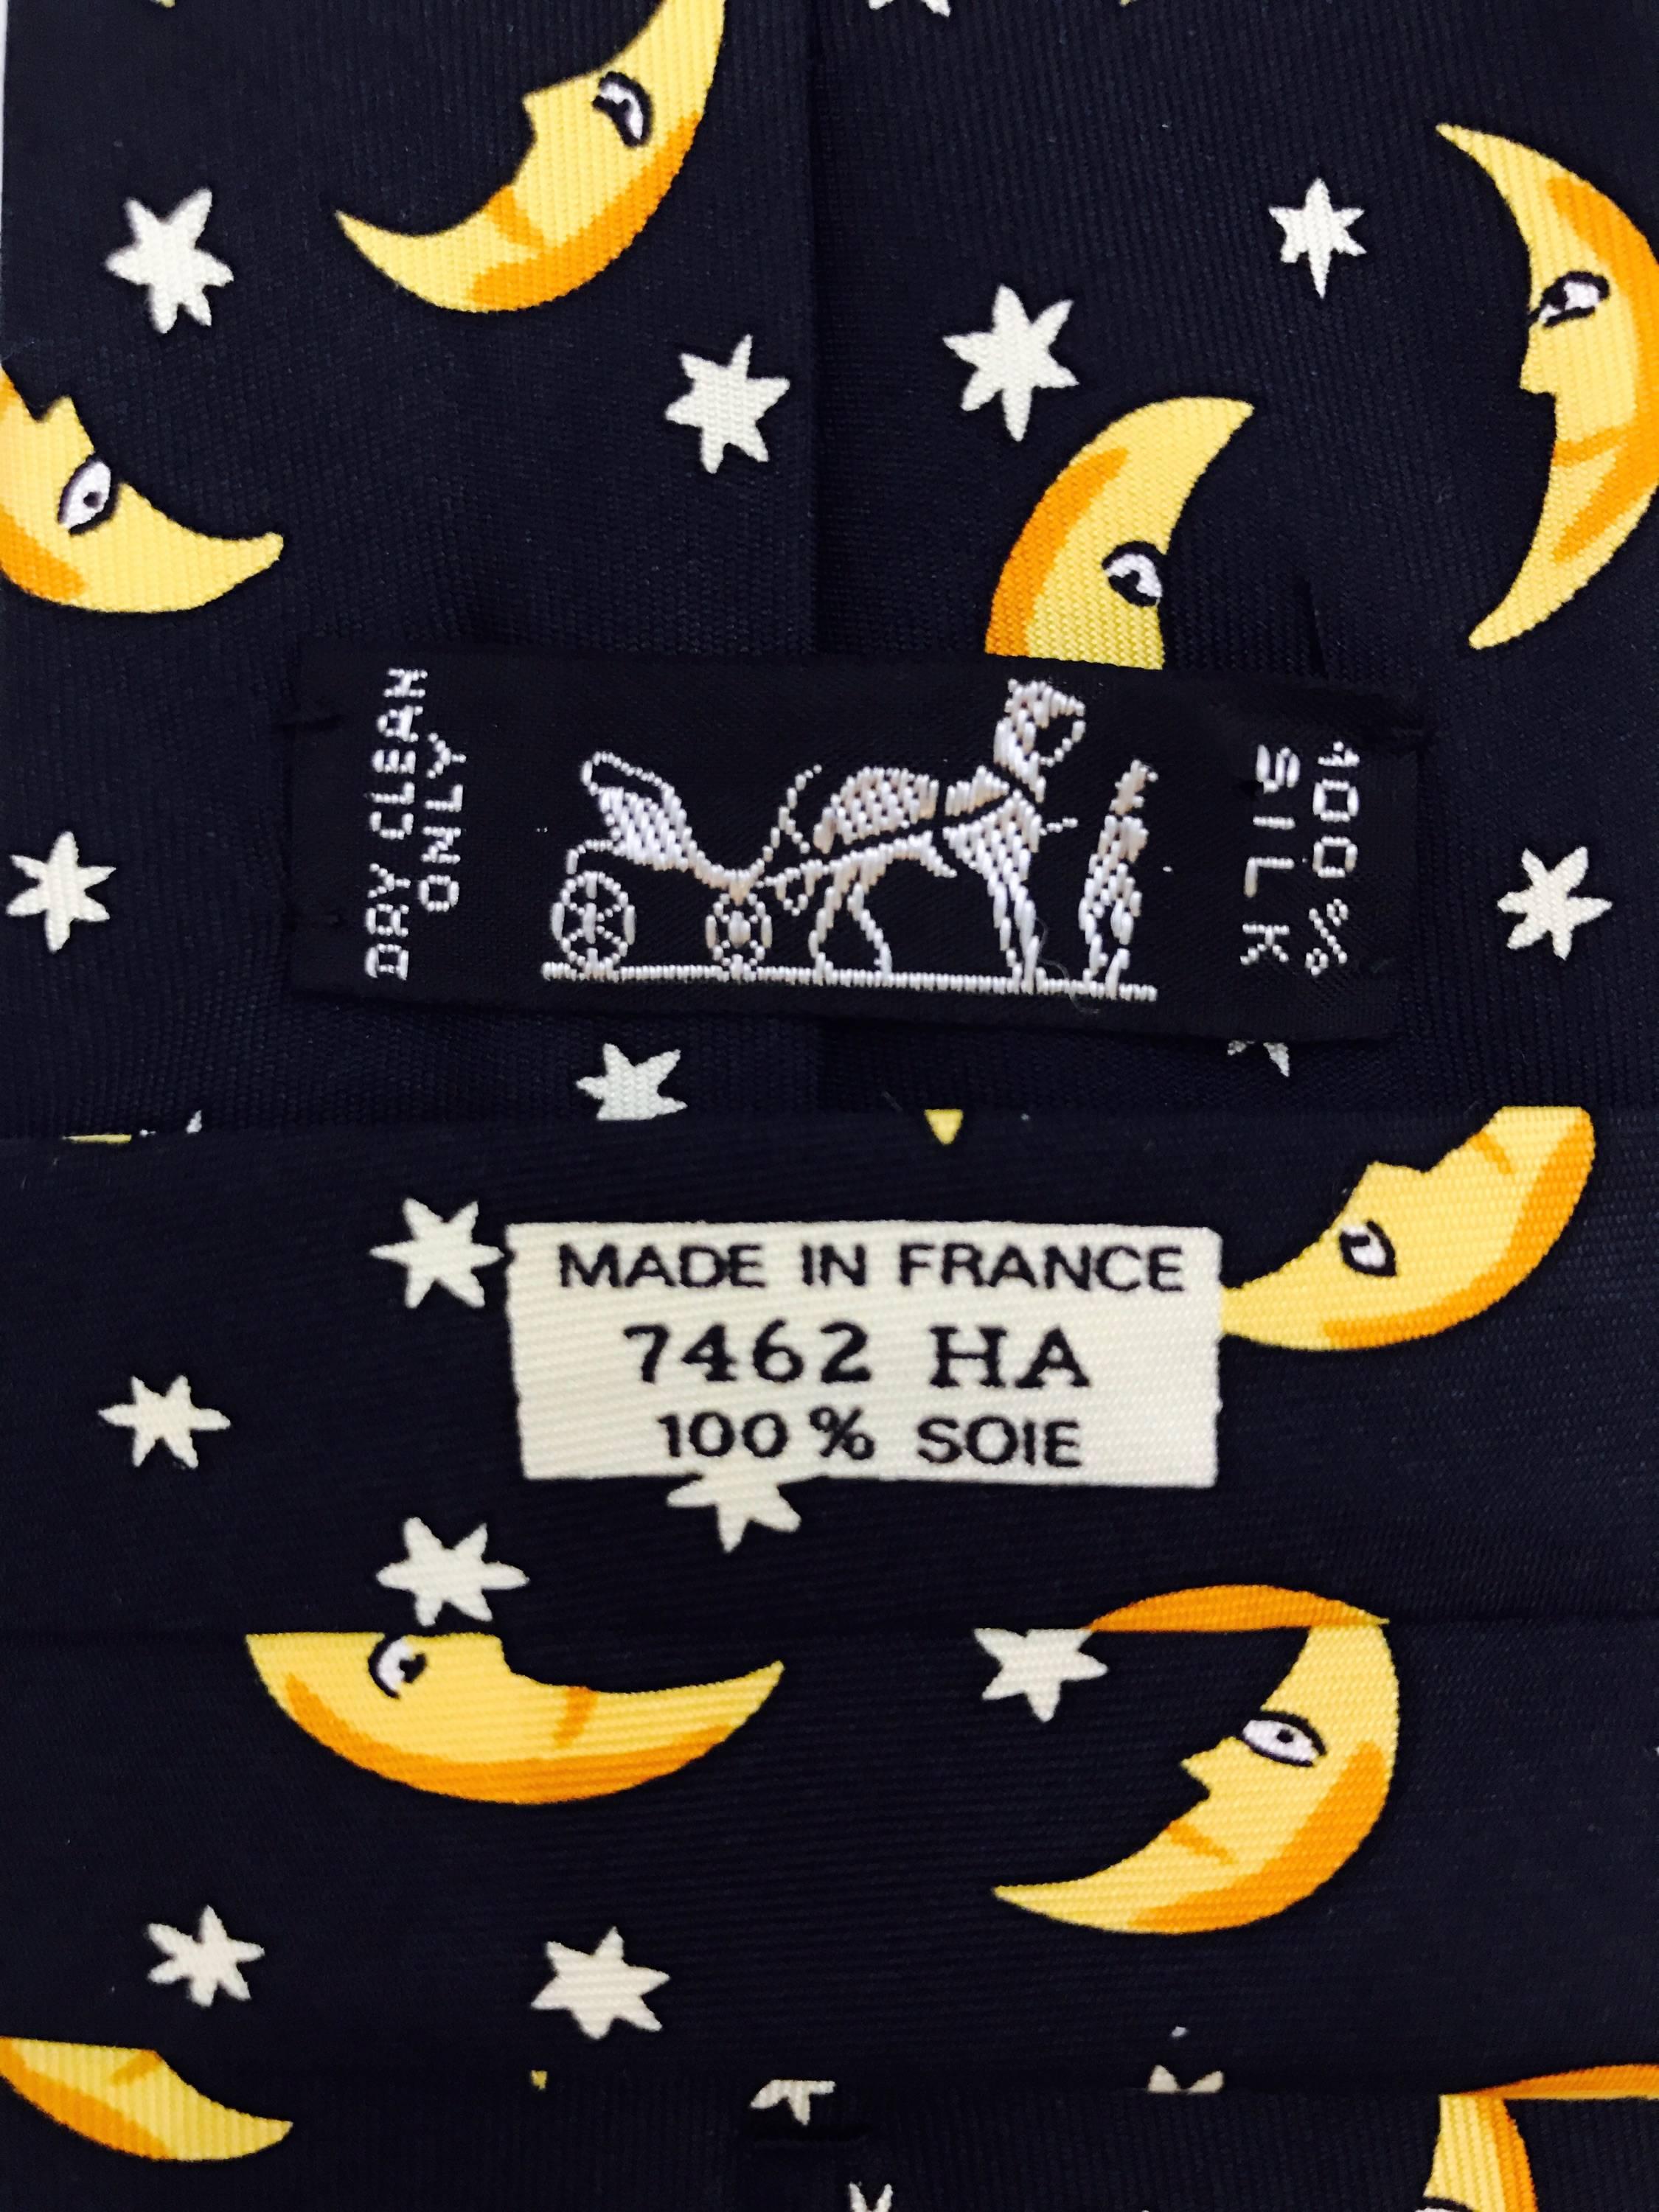 Another whimsy from the house of Hermes.  In black silk, this tie features smiling men in the moon, and twinkling stars.  A fun tie for night or day!